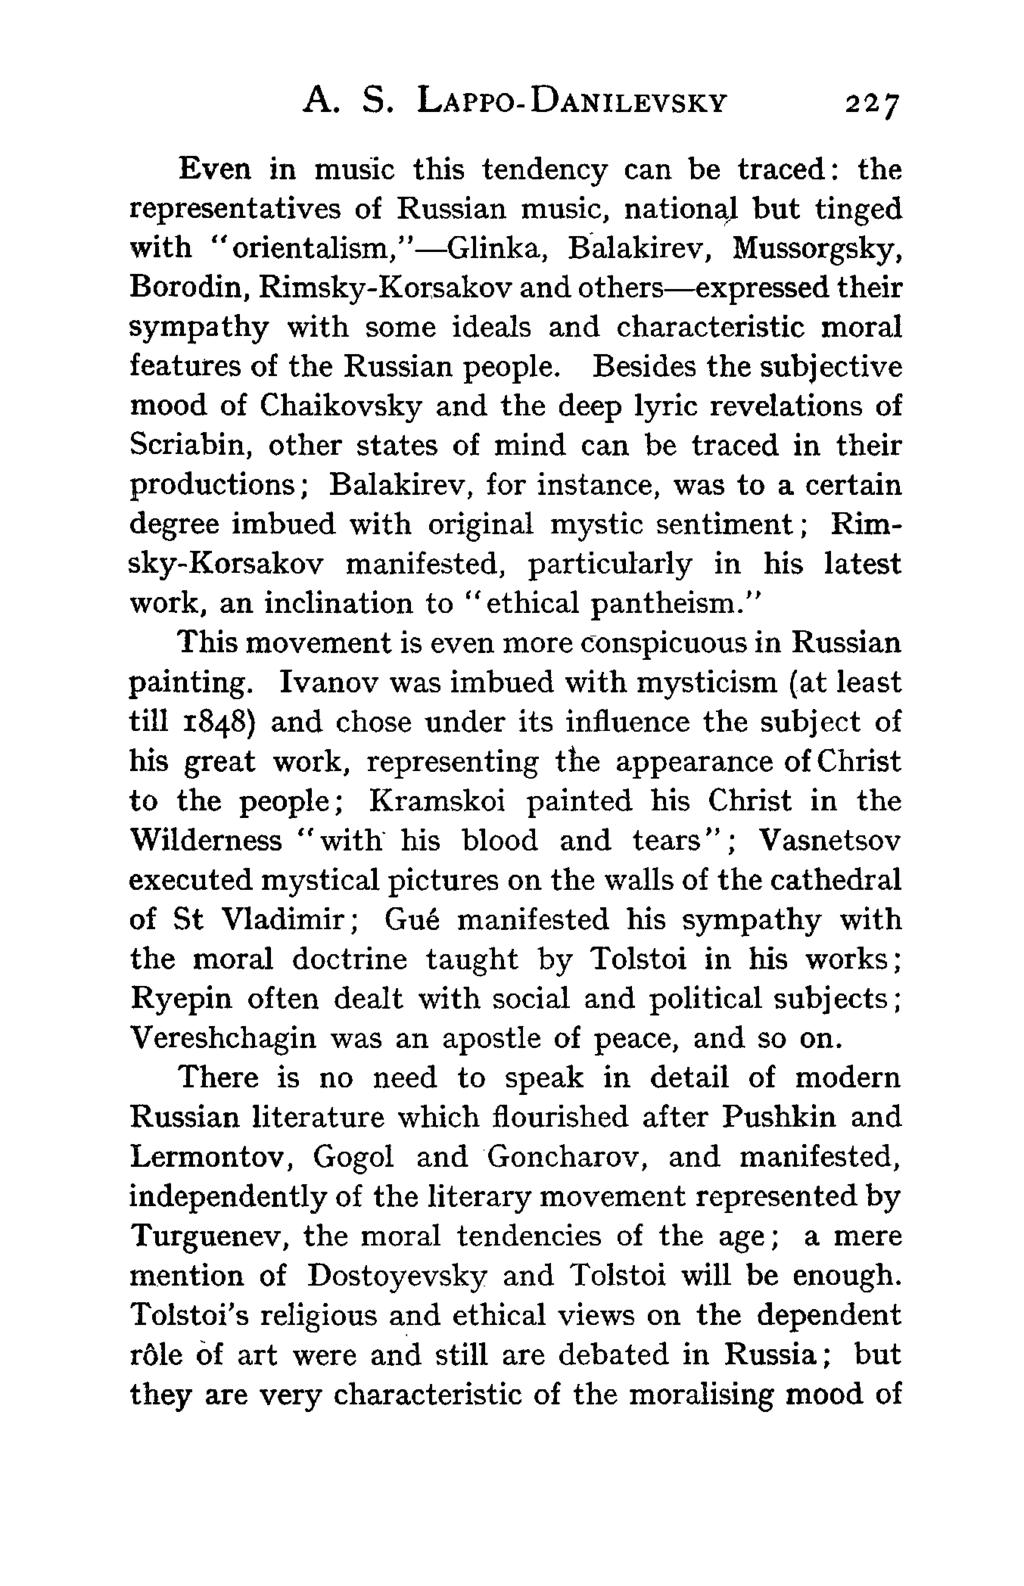 A. S. LAPPO-DANILEVSKY 227 Even in music this tendency can be traced: the representatives of Russian music, national but tinged with "orientalism," Glinka, Balakirev, Mussorgsky, Borodin,